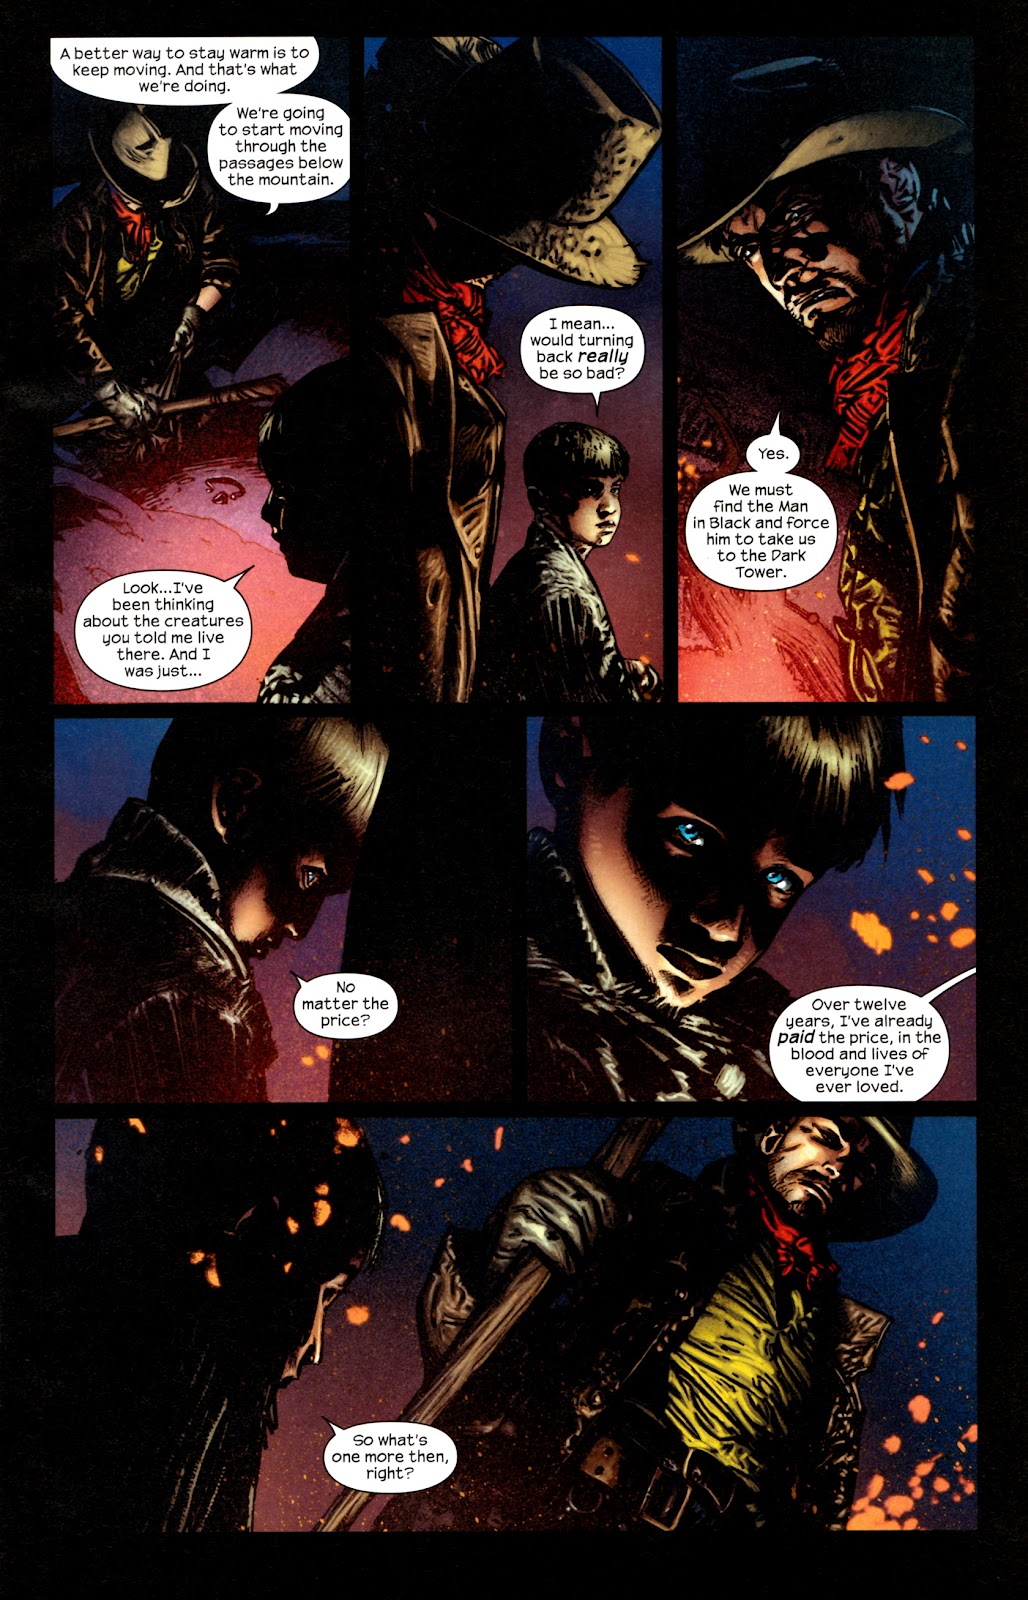 Dark Tower: The Gunslinger - The Man in Black issue 1 - Page 9